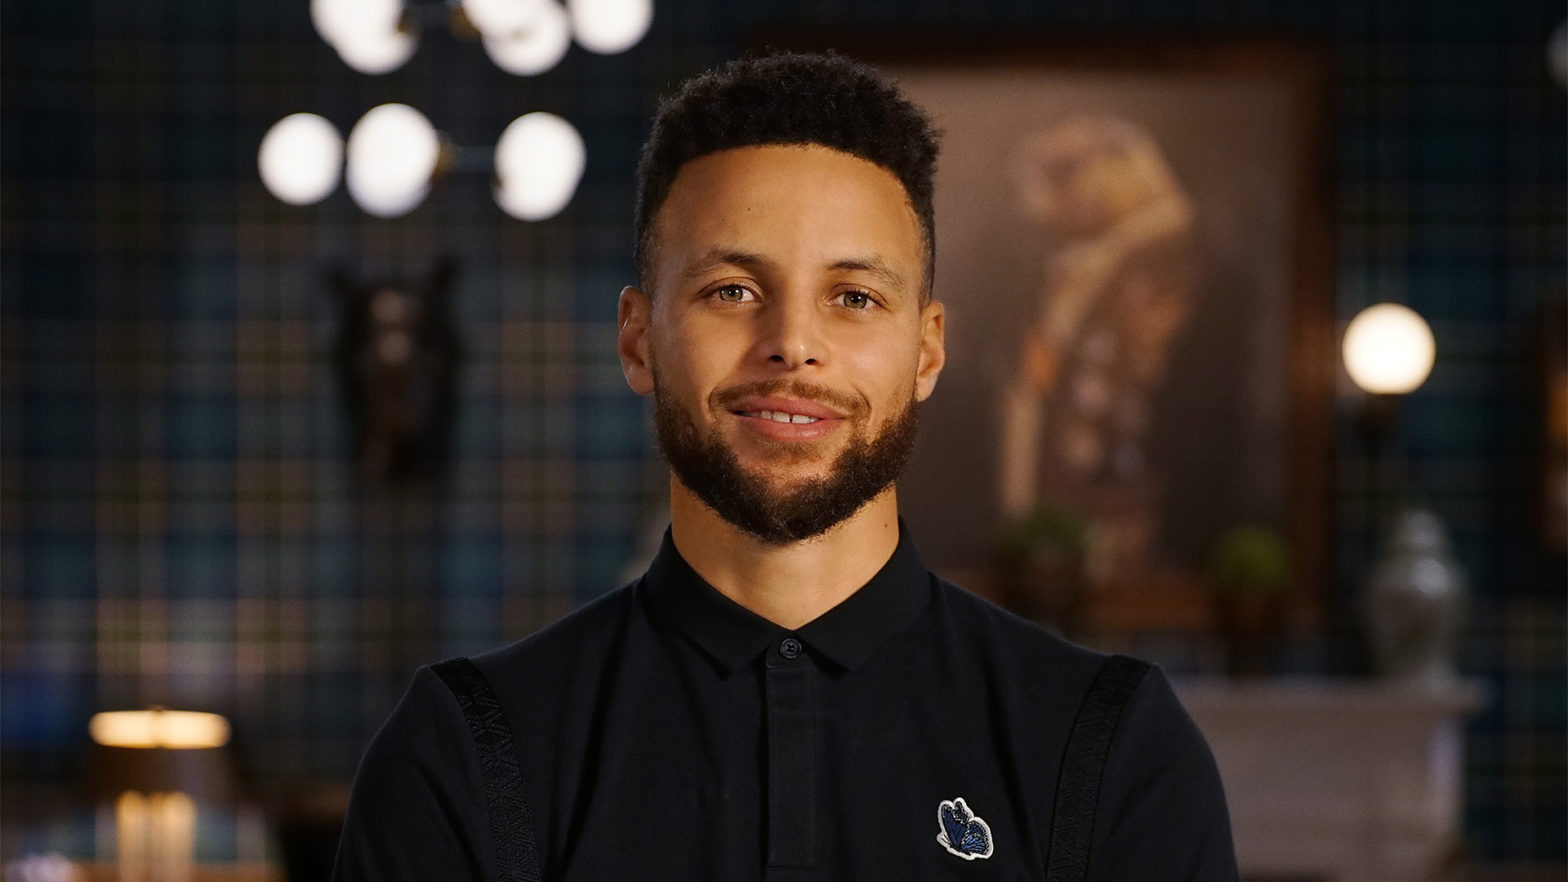 Stephen Curry Explains Why He Didn't 'Second-Guess' The Big Undersell Of His $44M NBA Deal In 2012